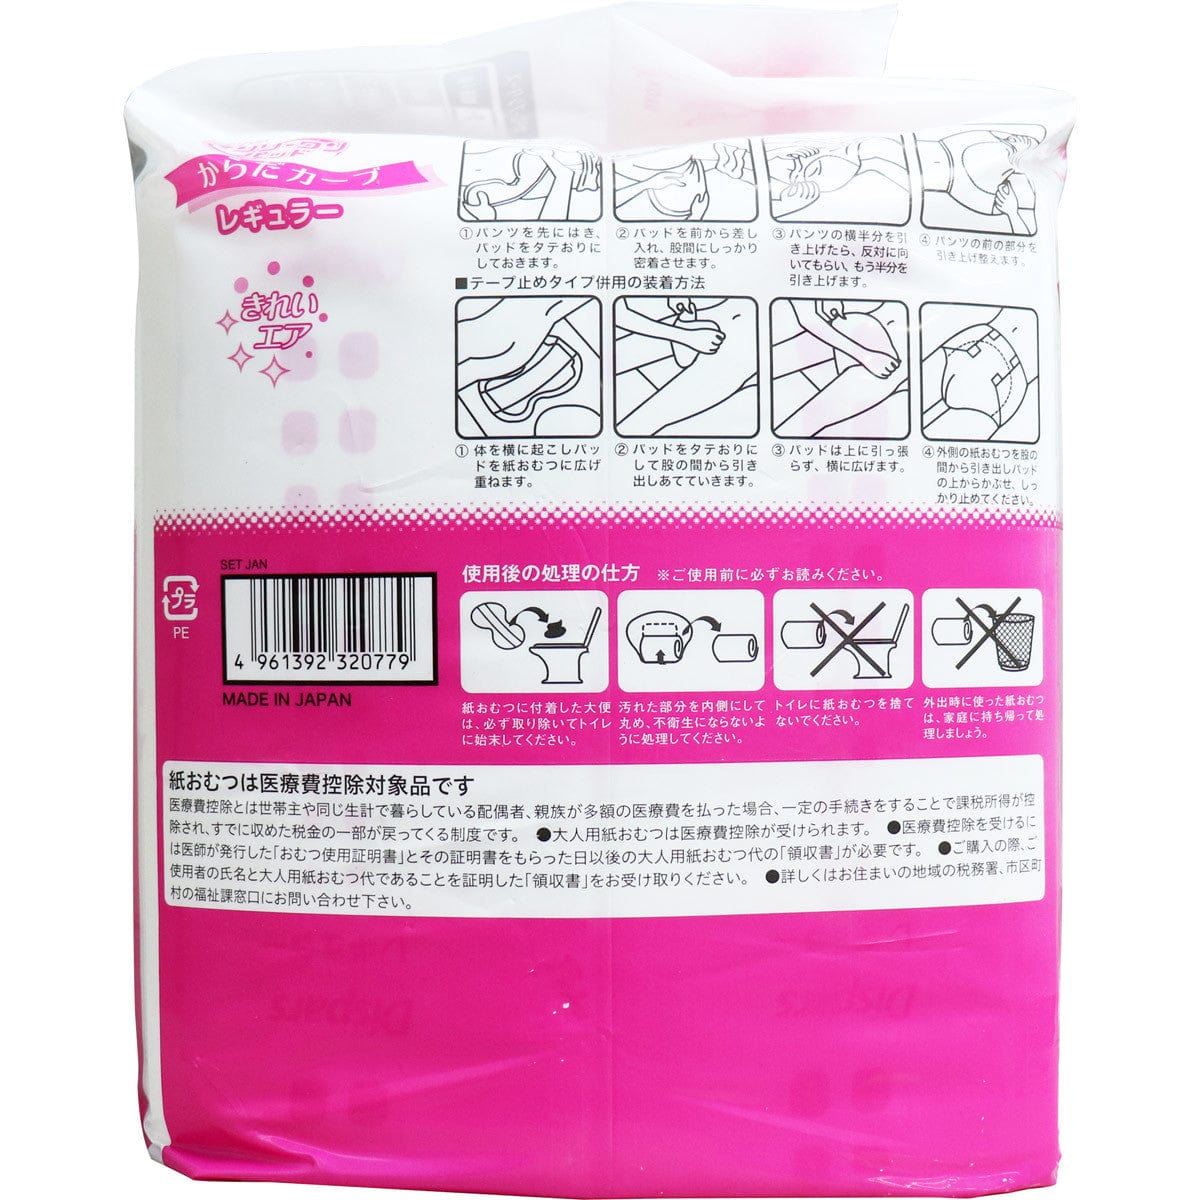 Koyo - Dispars Only One Pad Body Curve Urine Leakage Unisex Adult Diapers -  Adult Diapers  Durio.sg